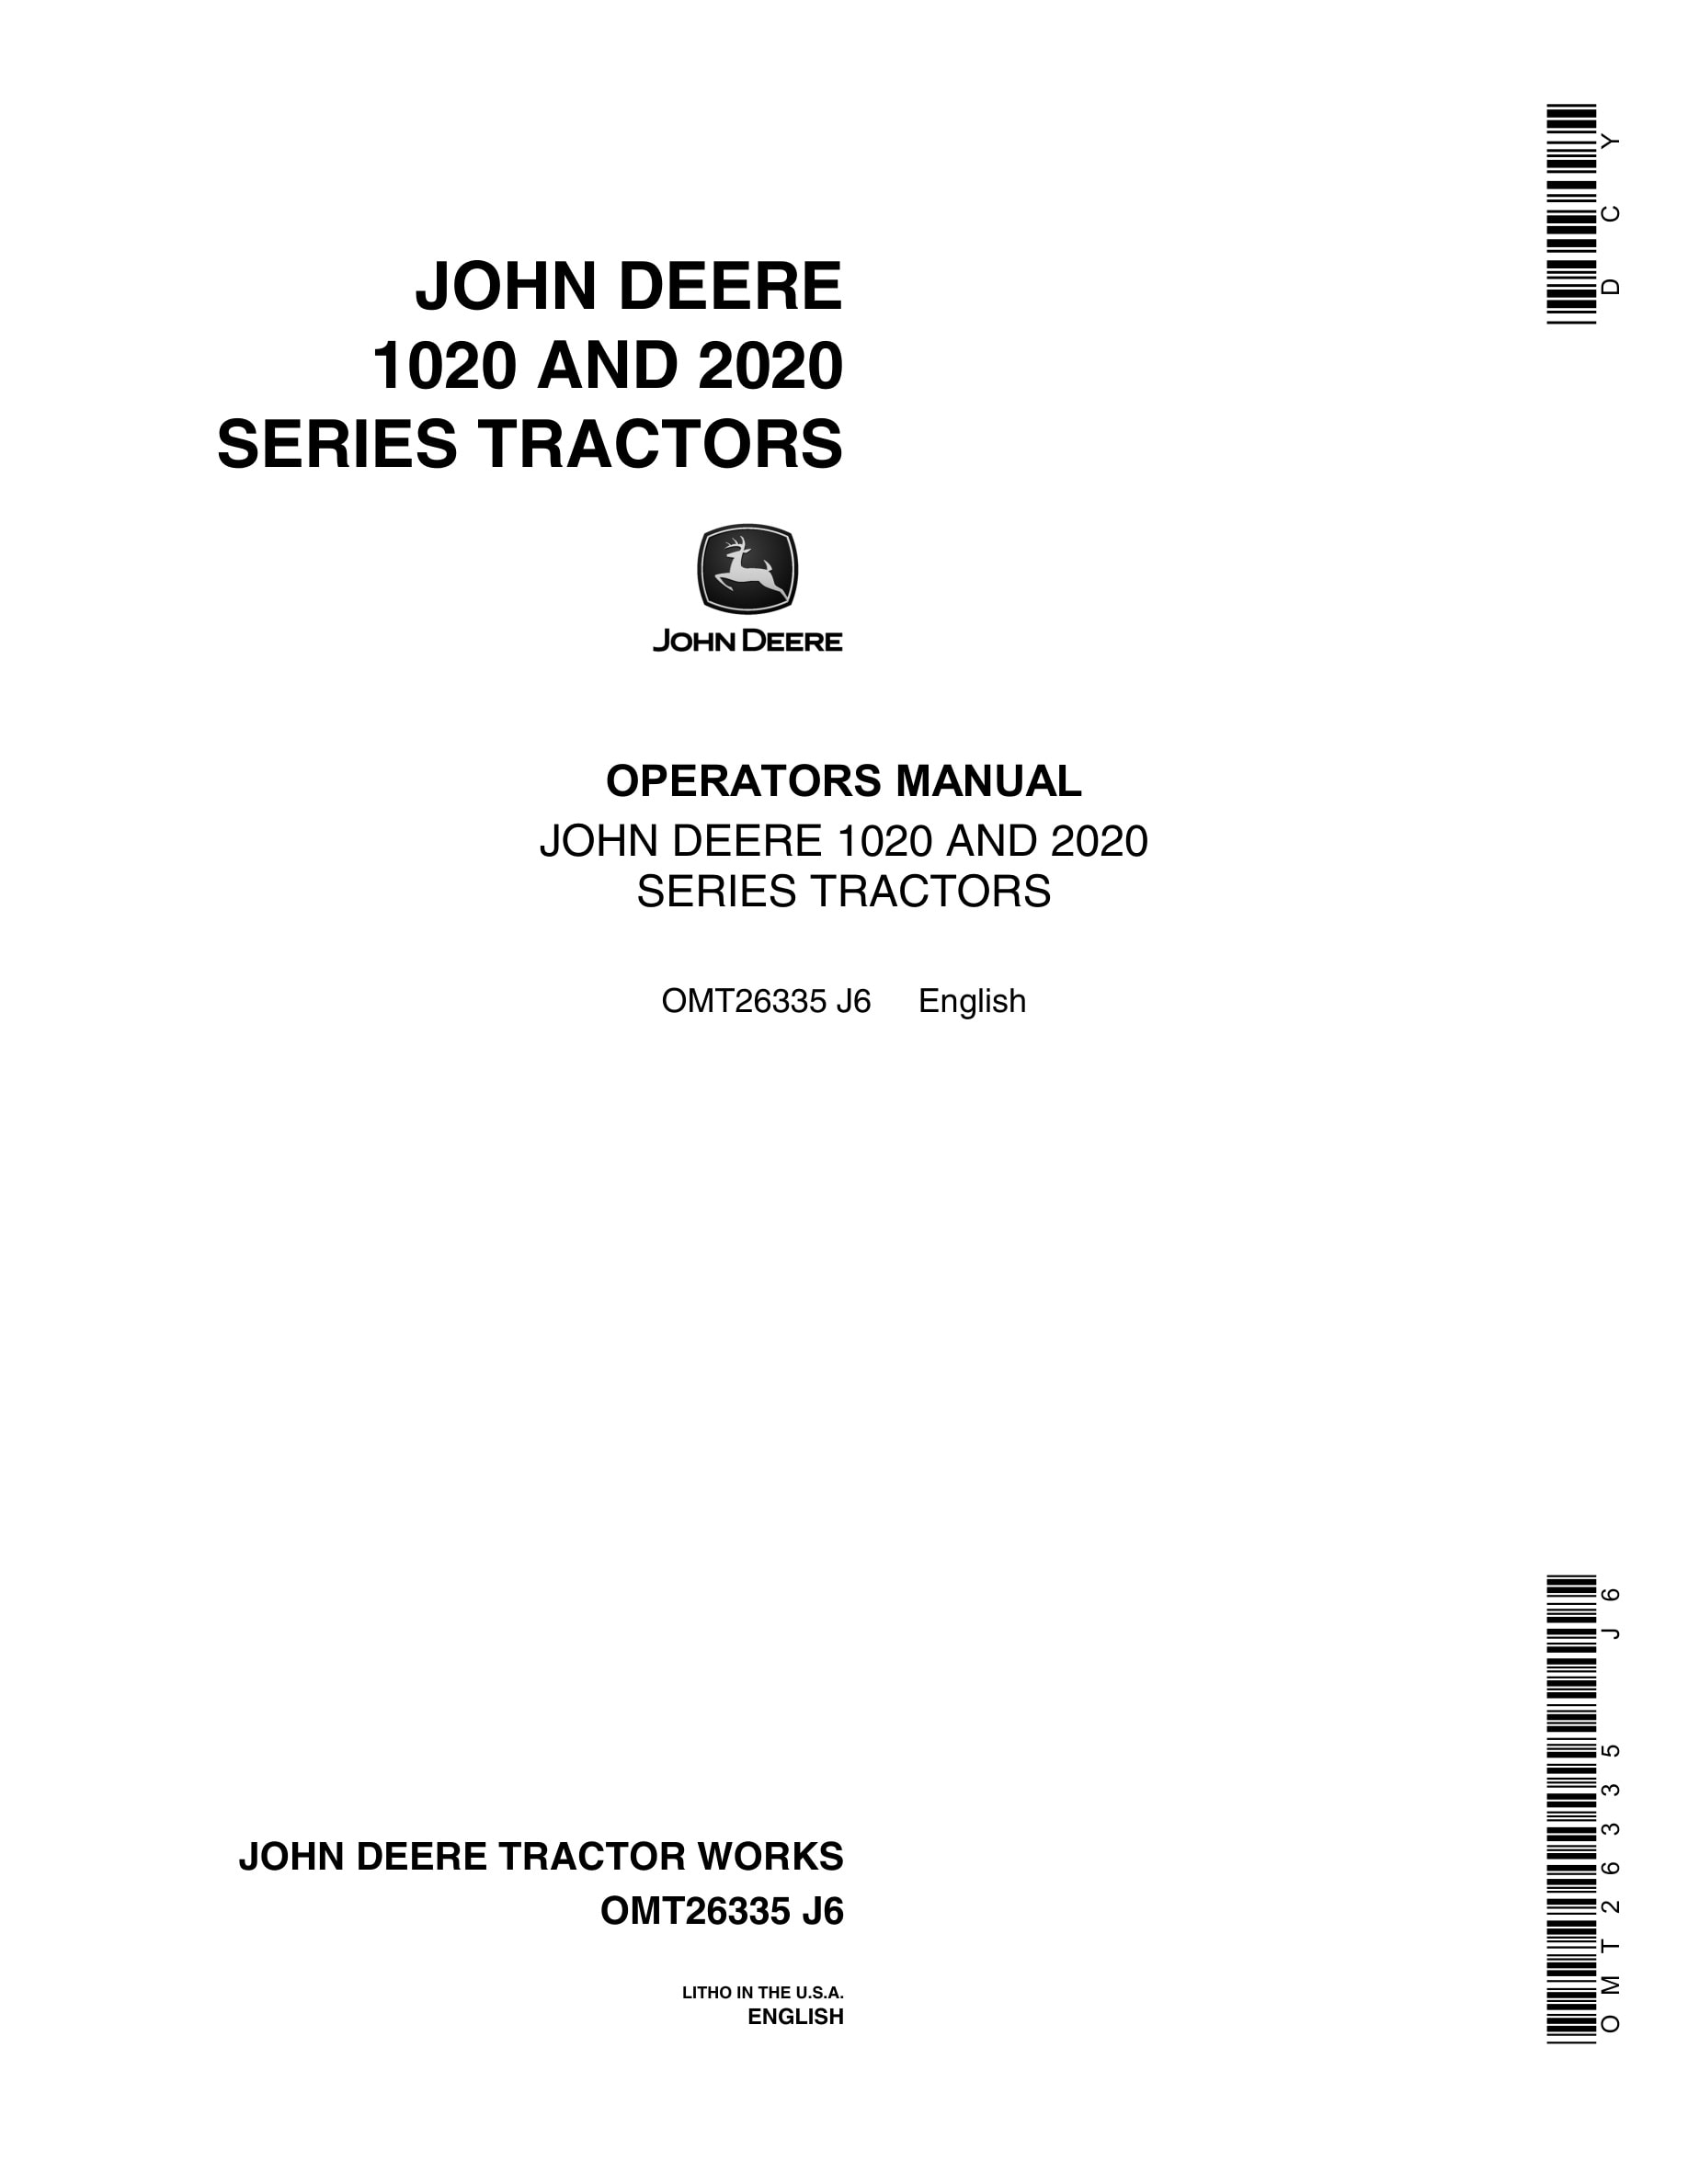 John Deere 1020 AND 2020 Tractor Operator Manual OMT26335-1